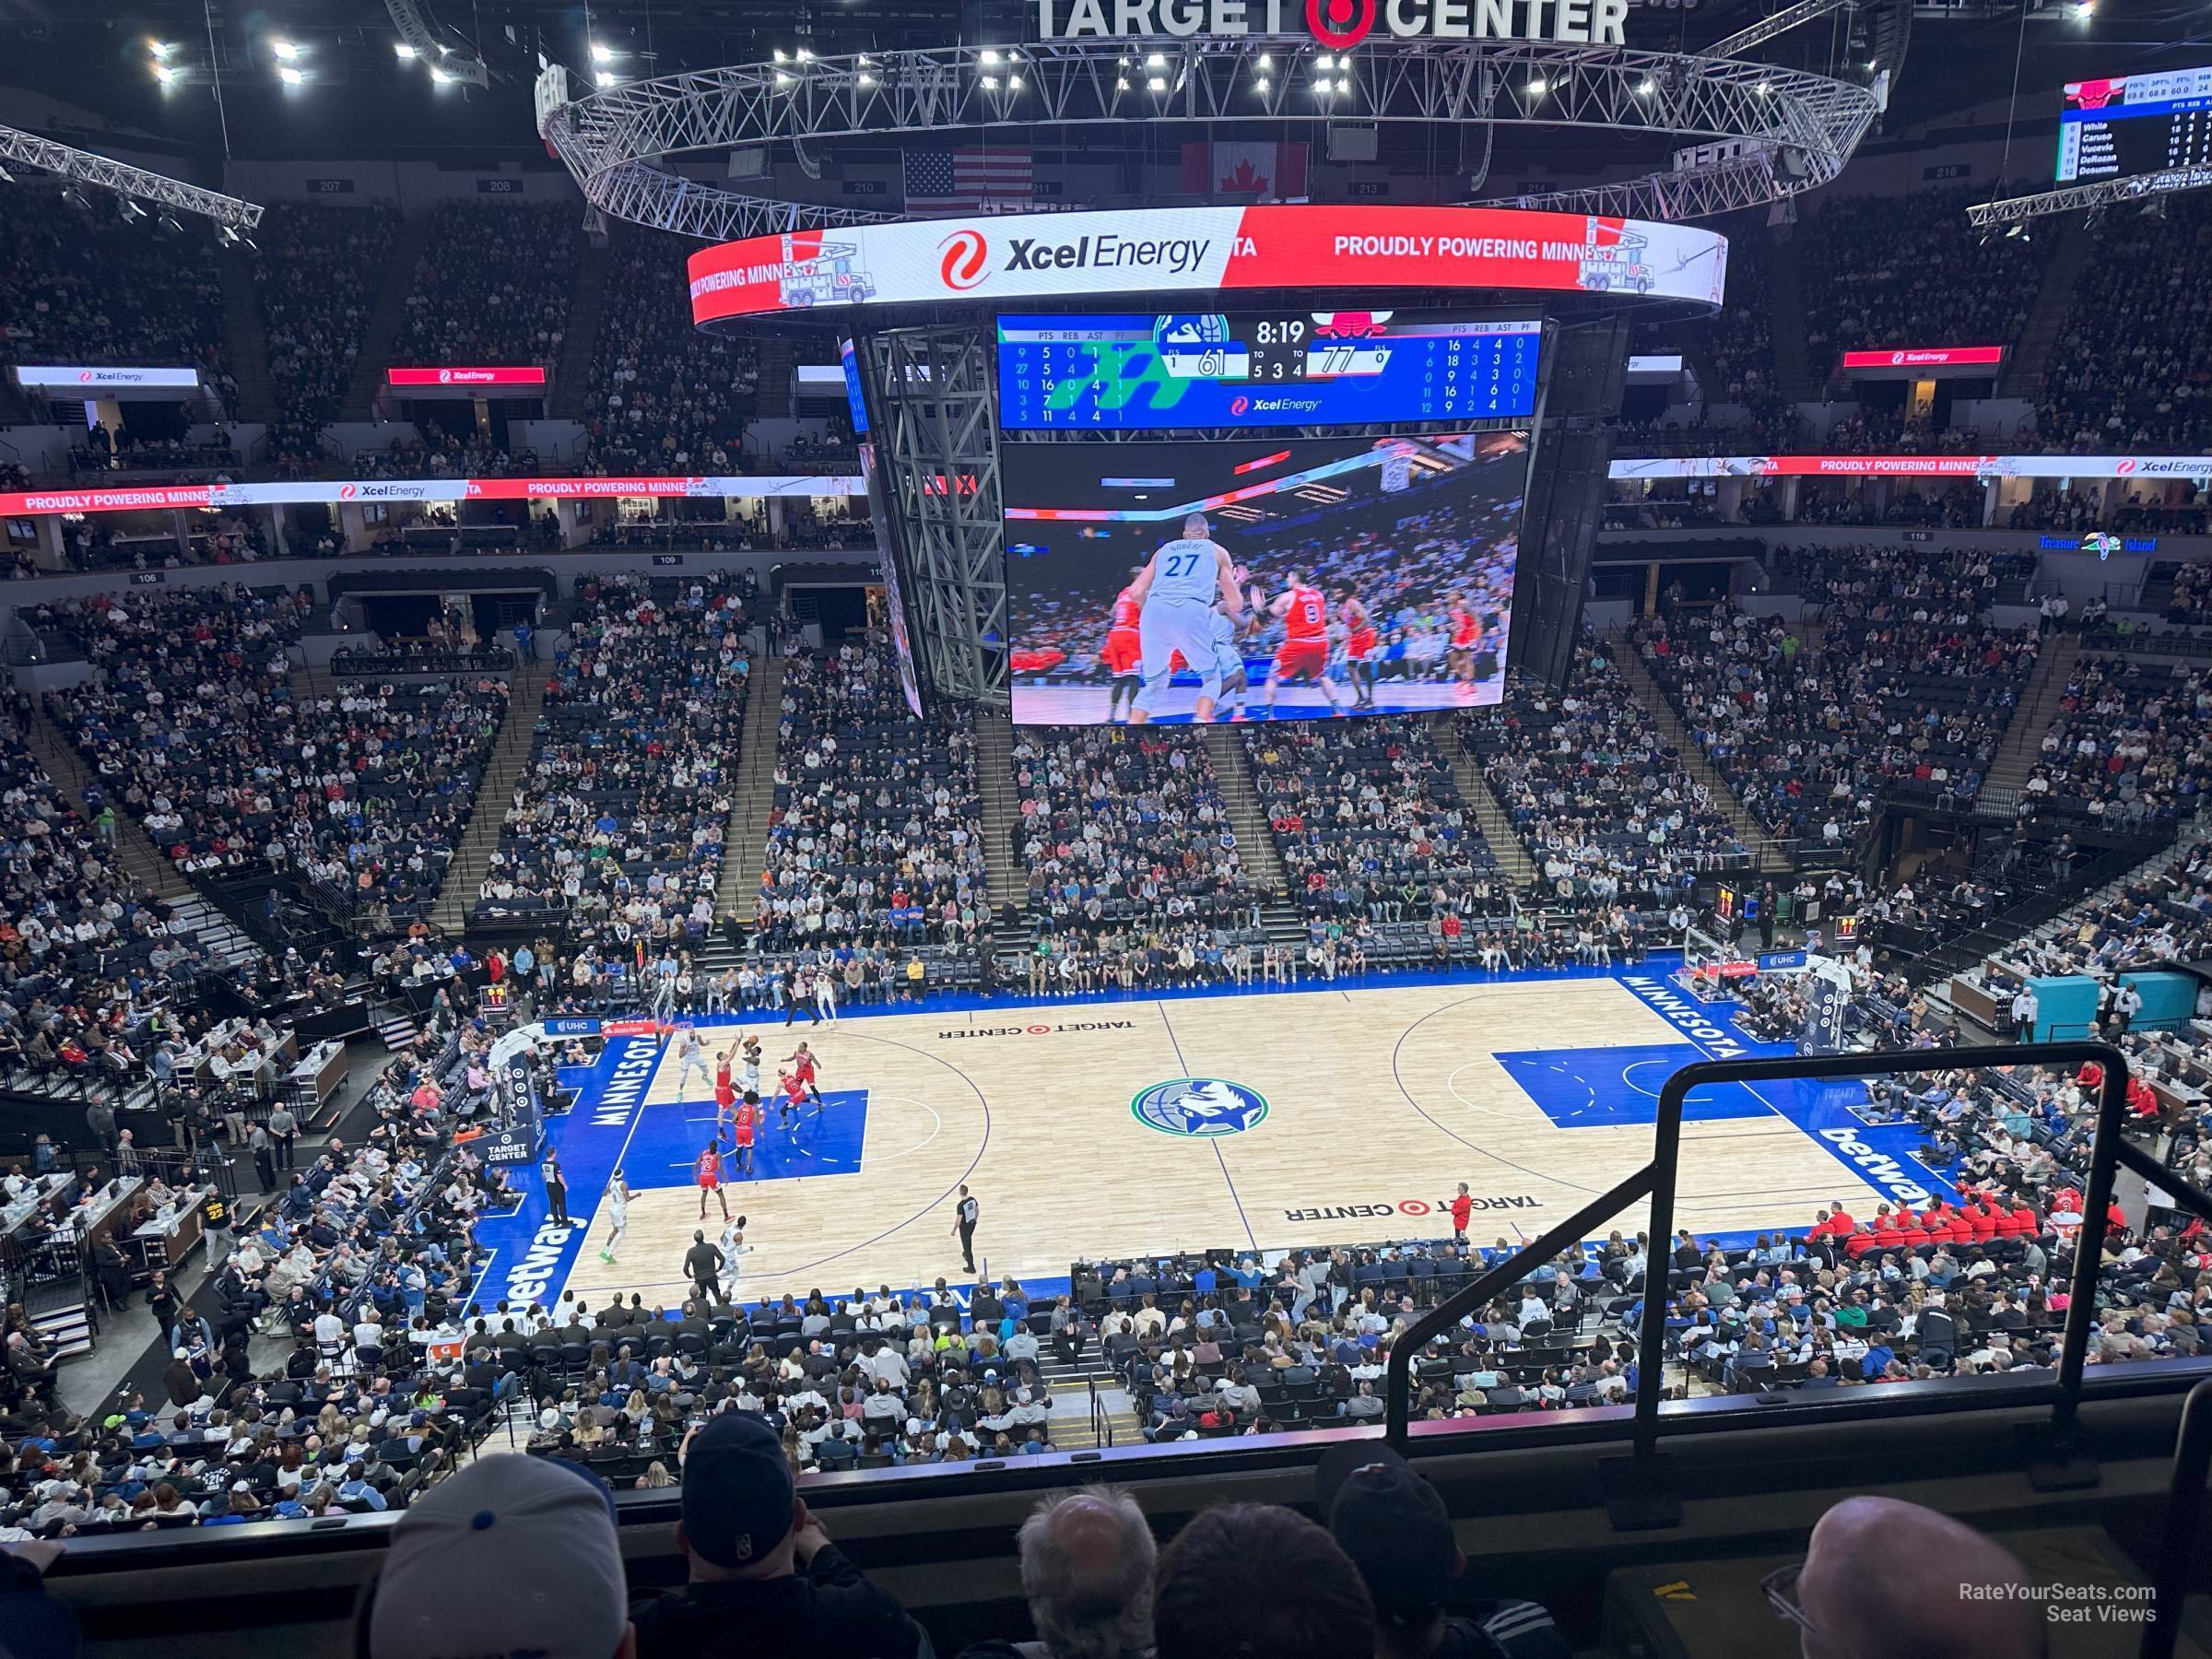 section 232, row c seat view  for basketball - target center